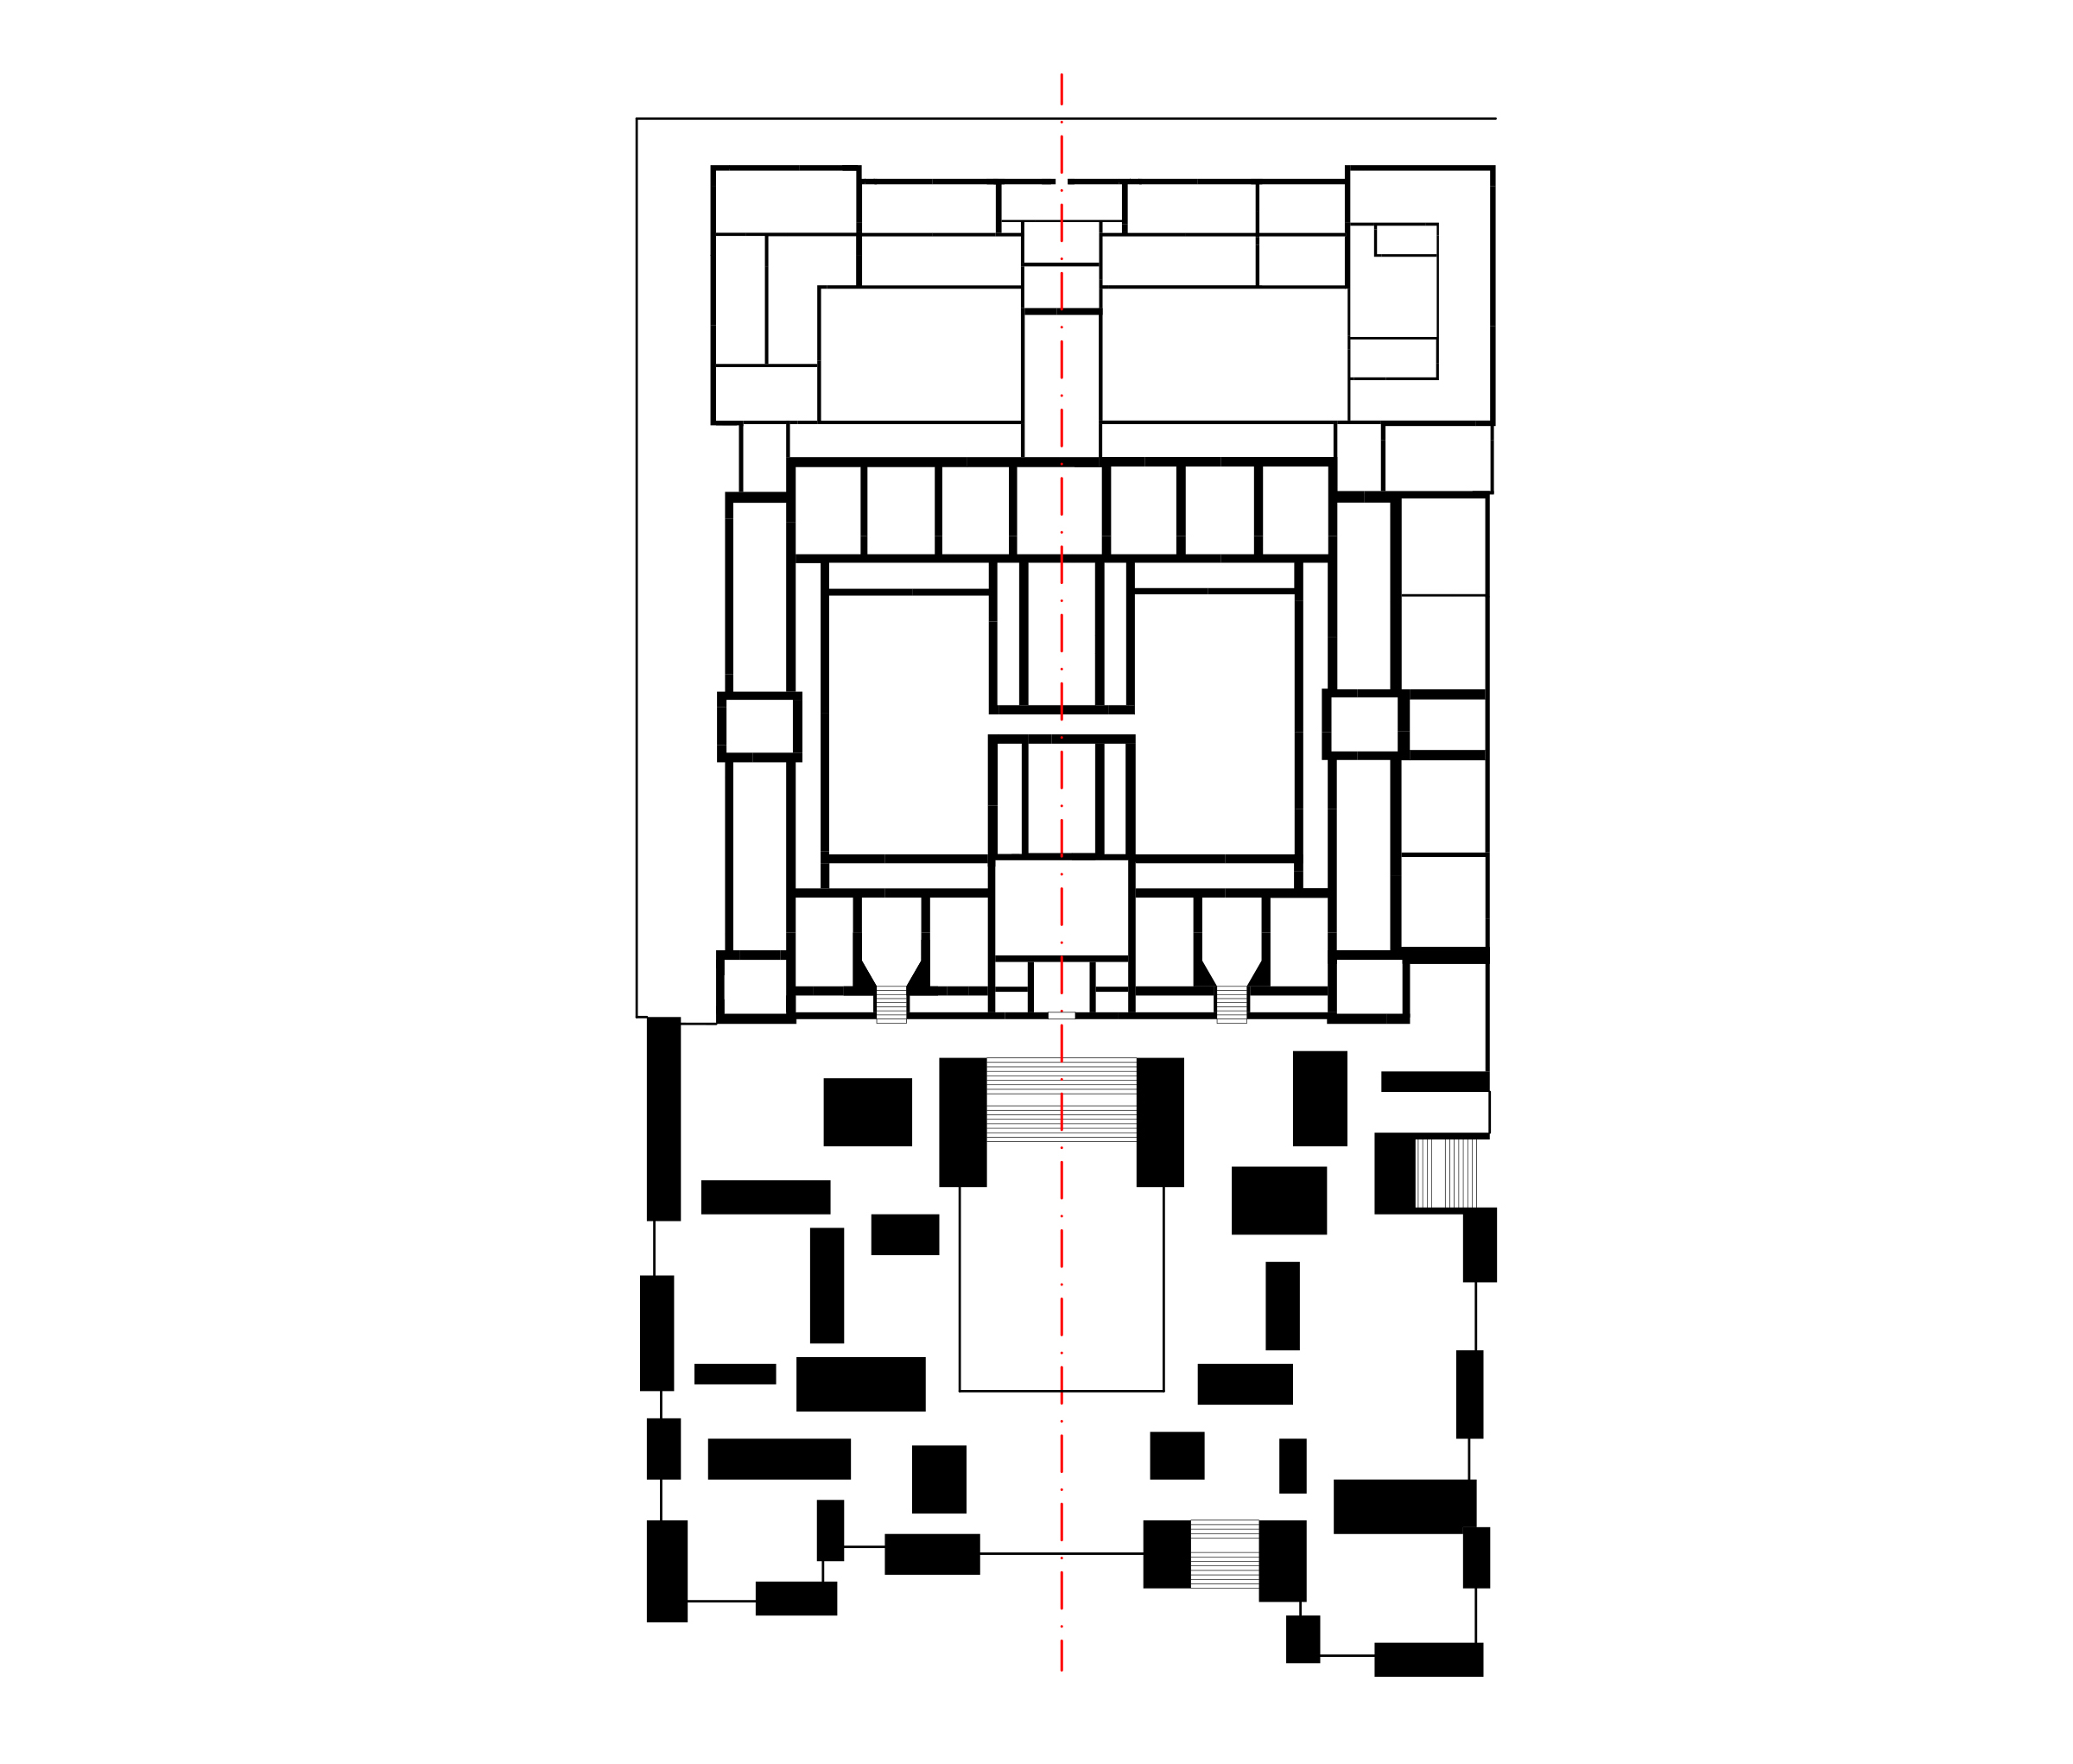 Schematic lower ground floor plan National Archaeological Museum Athens David Chipperfield Architects